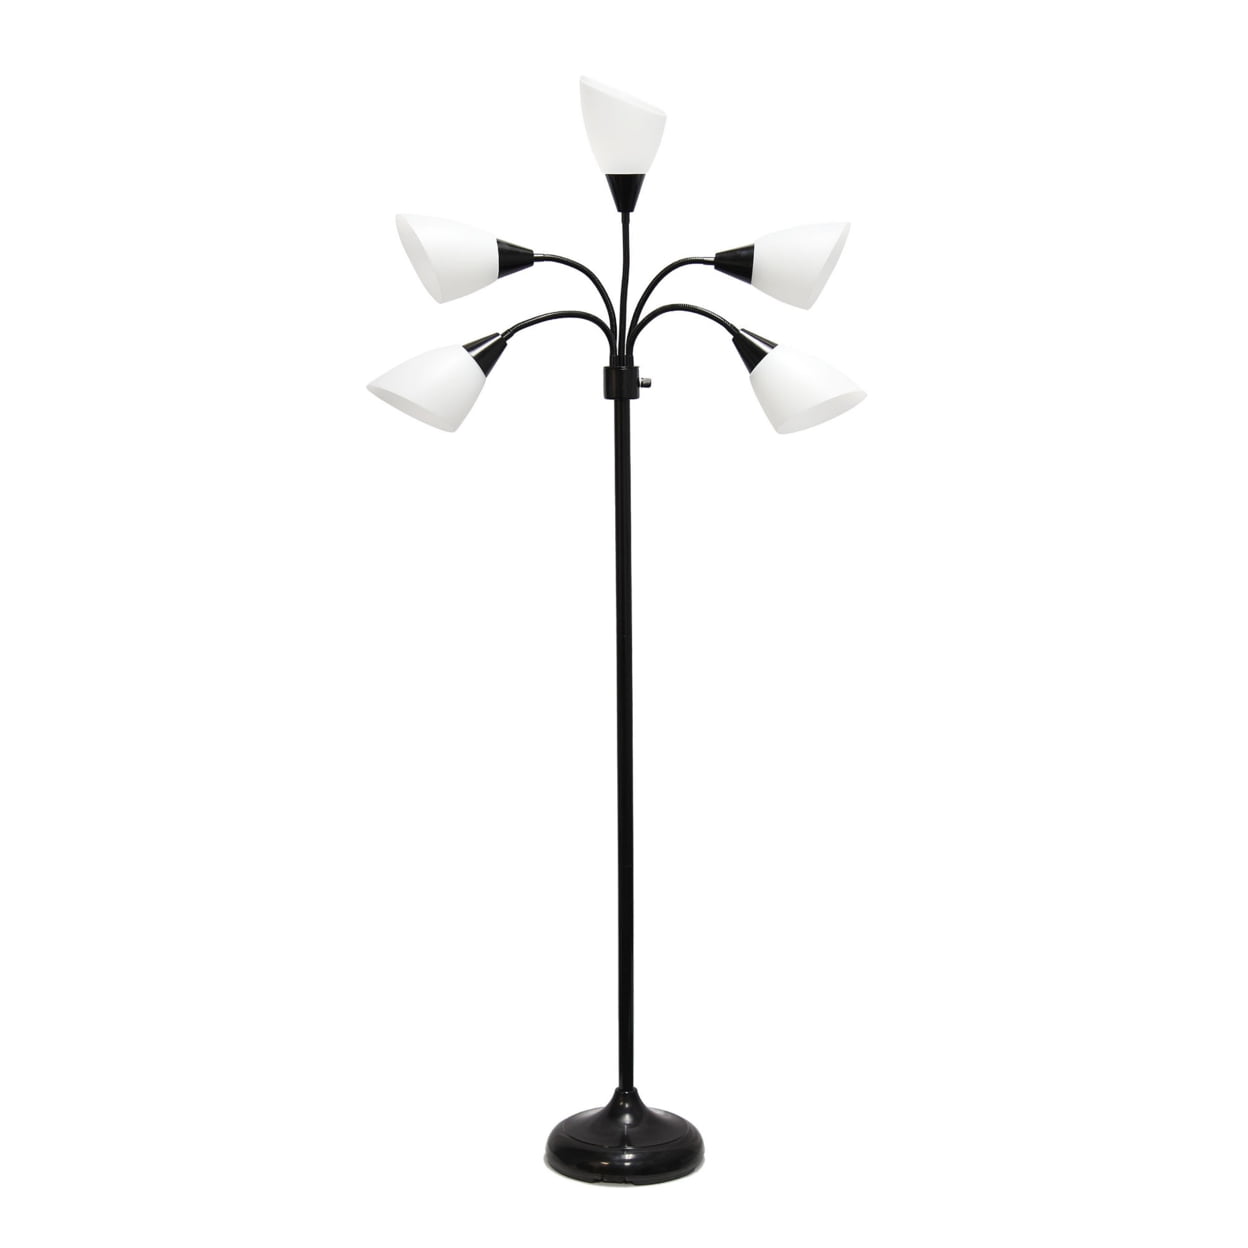 Picture of Simple Designs 67in. Contemporary Multi Head Medusa 5 Light Adjustable Gooseneck Black Floor Lamp with White Shades for Kids Bedroom Playroom Living Room Office